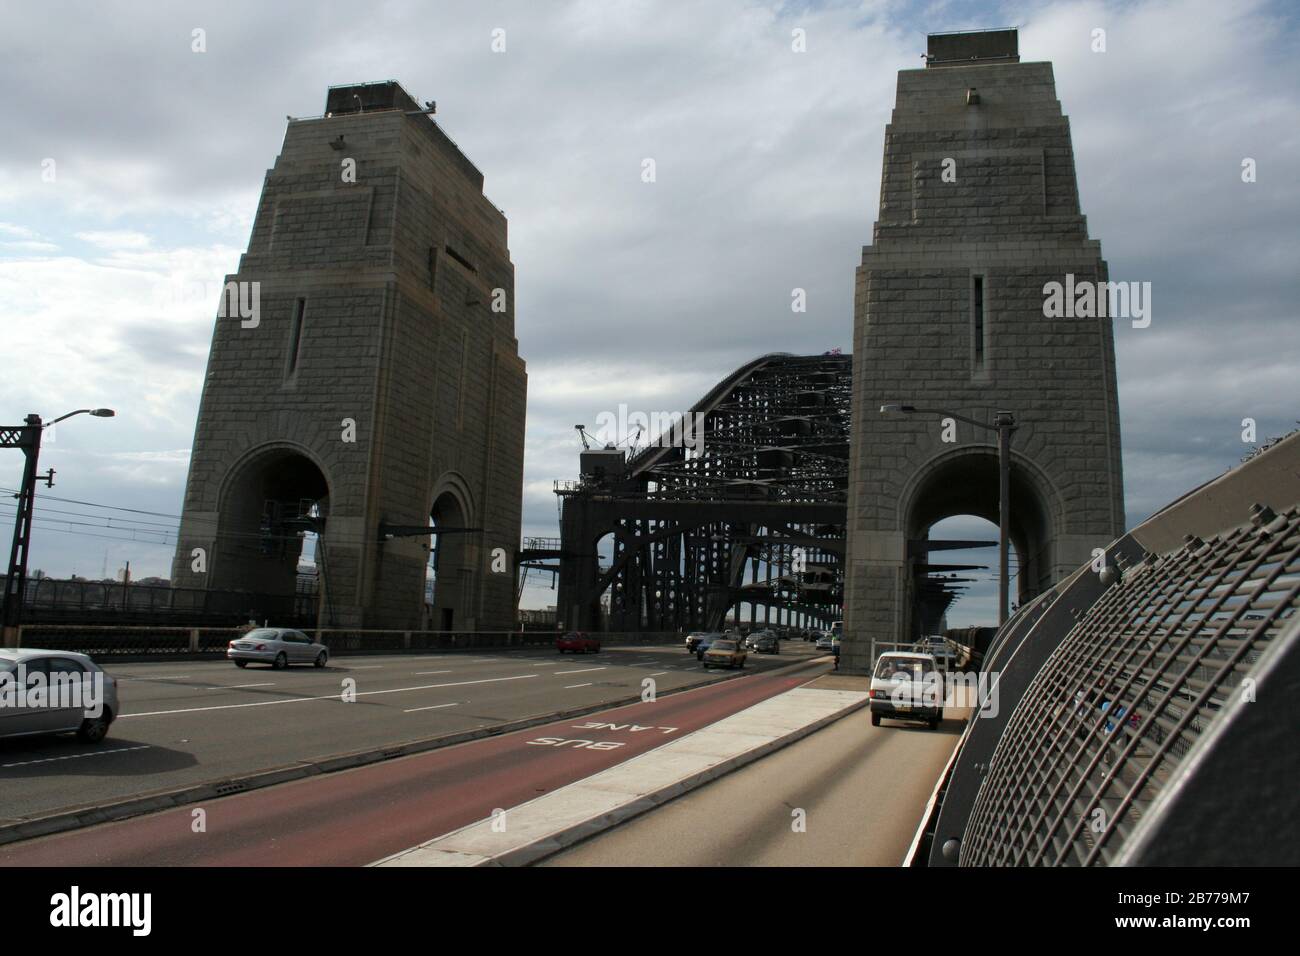 VIEW NORTH OF THE SYDNEY HABOUR BRIDGE WITH PYLONS IN THE FOREGROUND. NSW, AUSTRALIA. Stock Photo